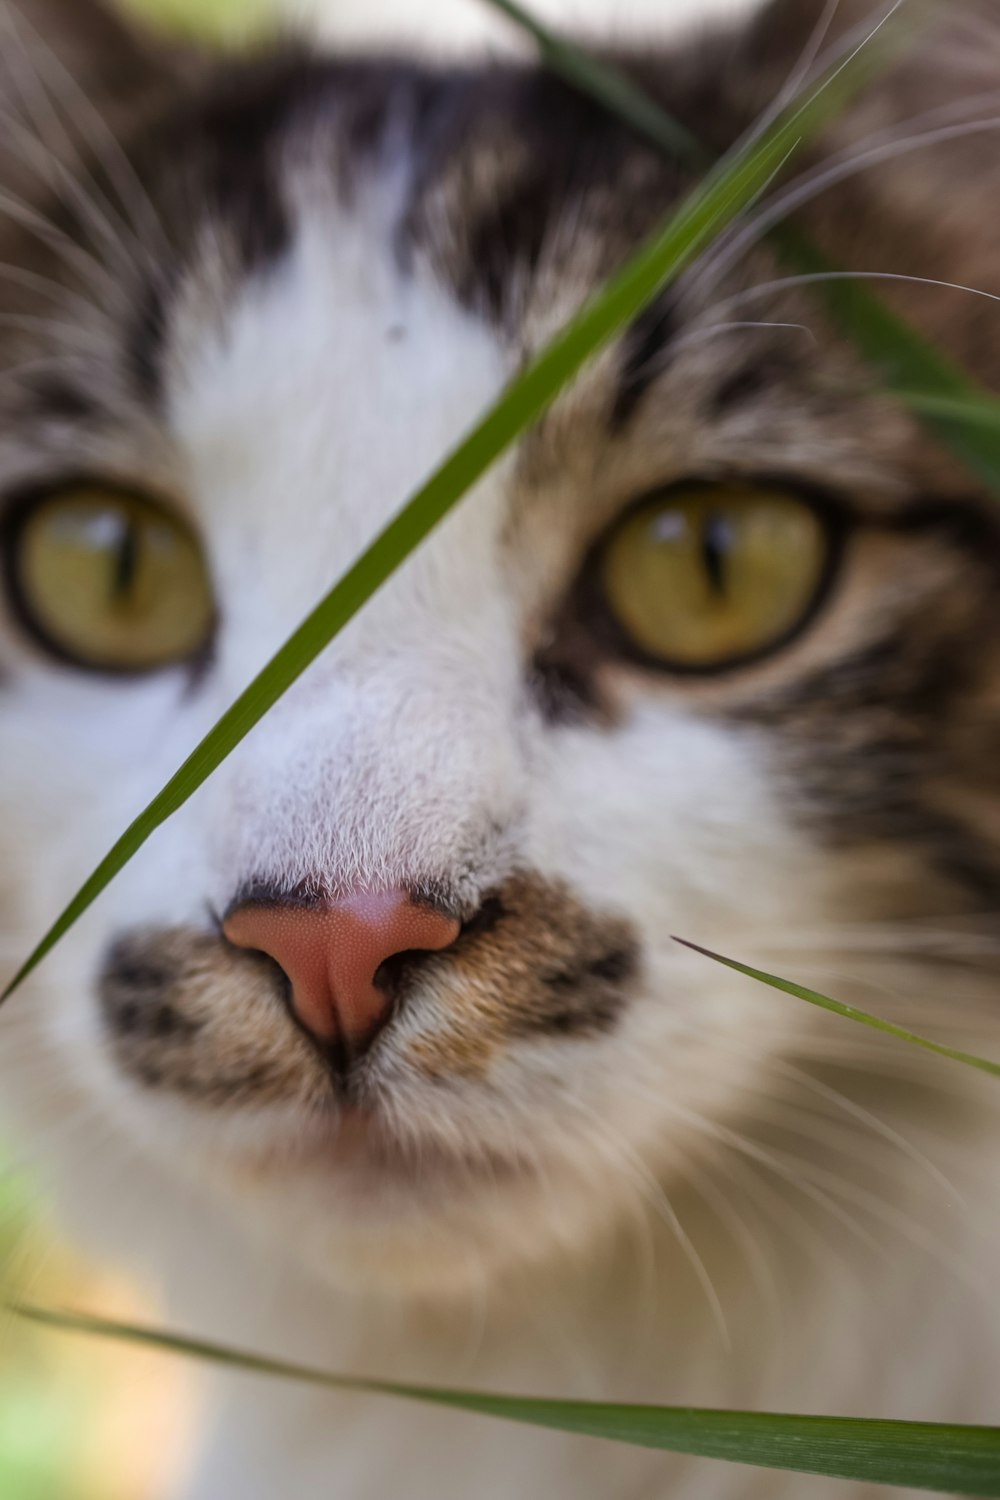 a close up of a cat's face with grass in the foreground